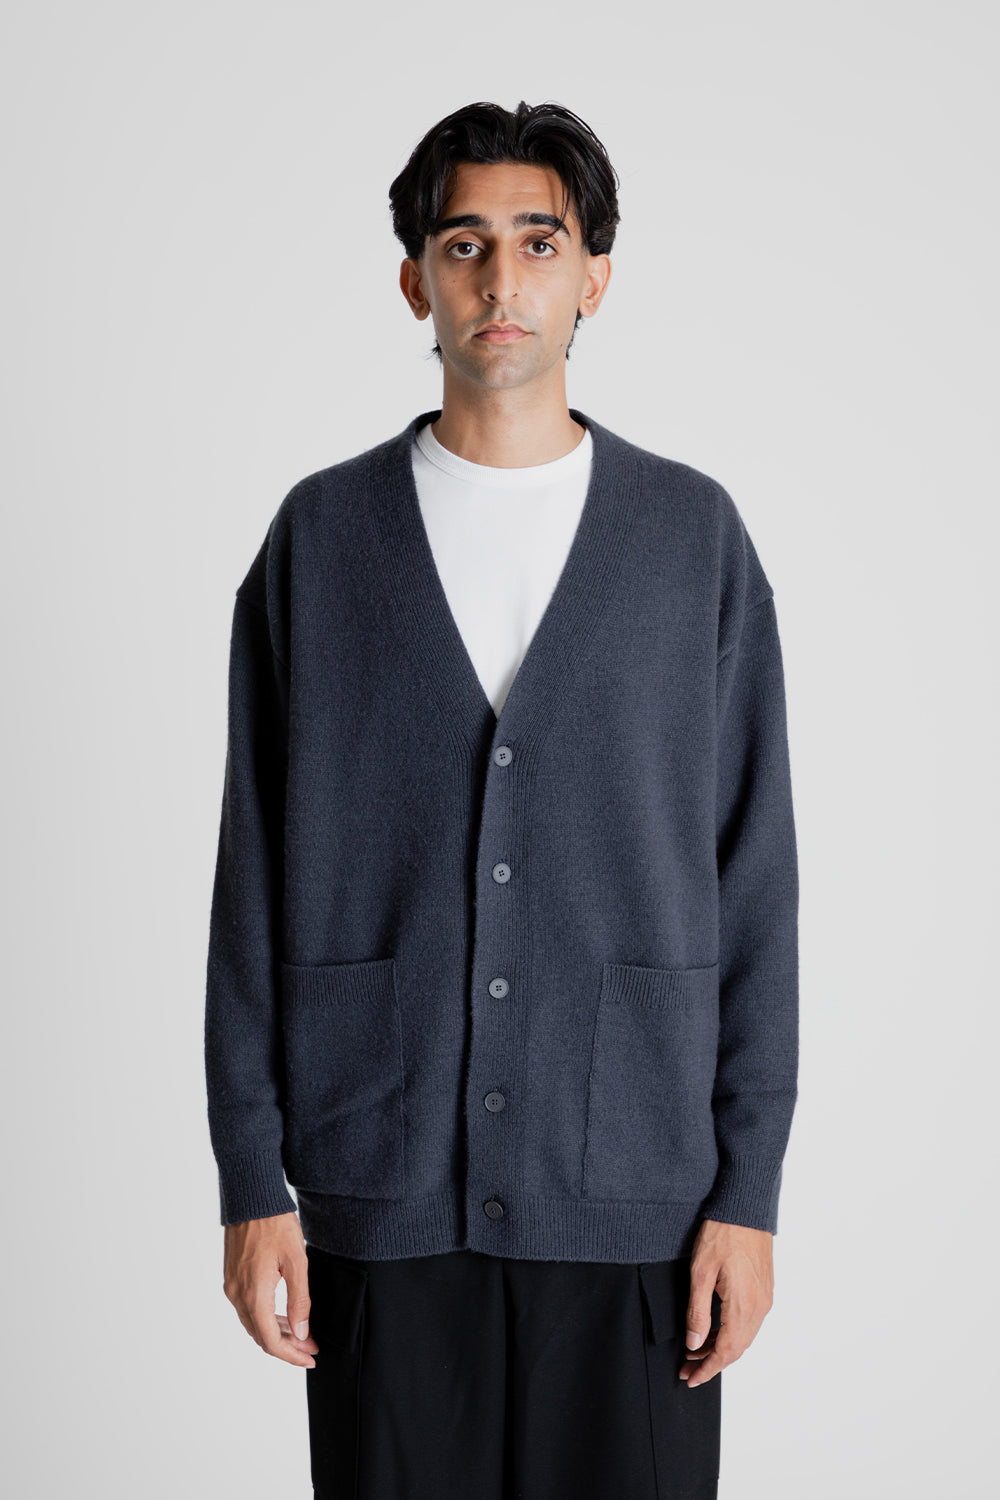 Aton Oversized Cardigan in Charcoal Grey | Wallace